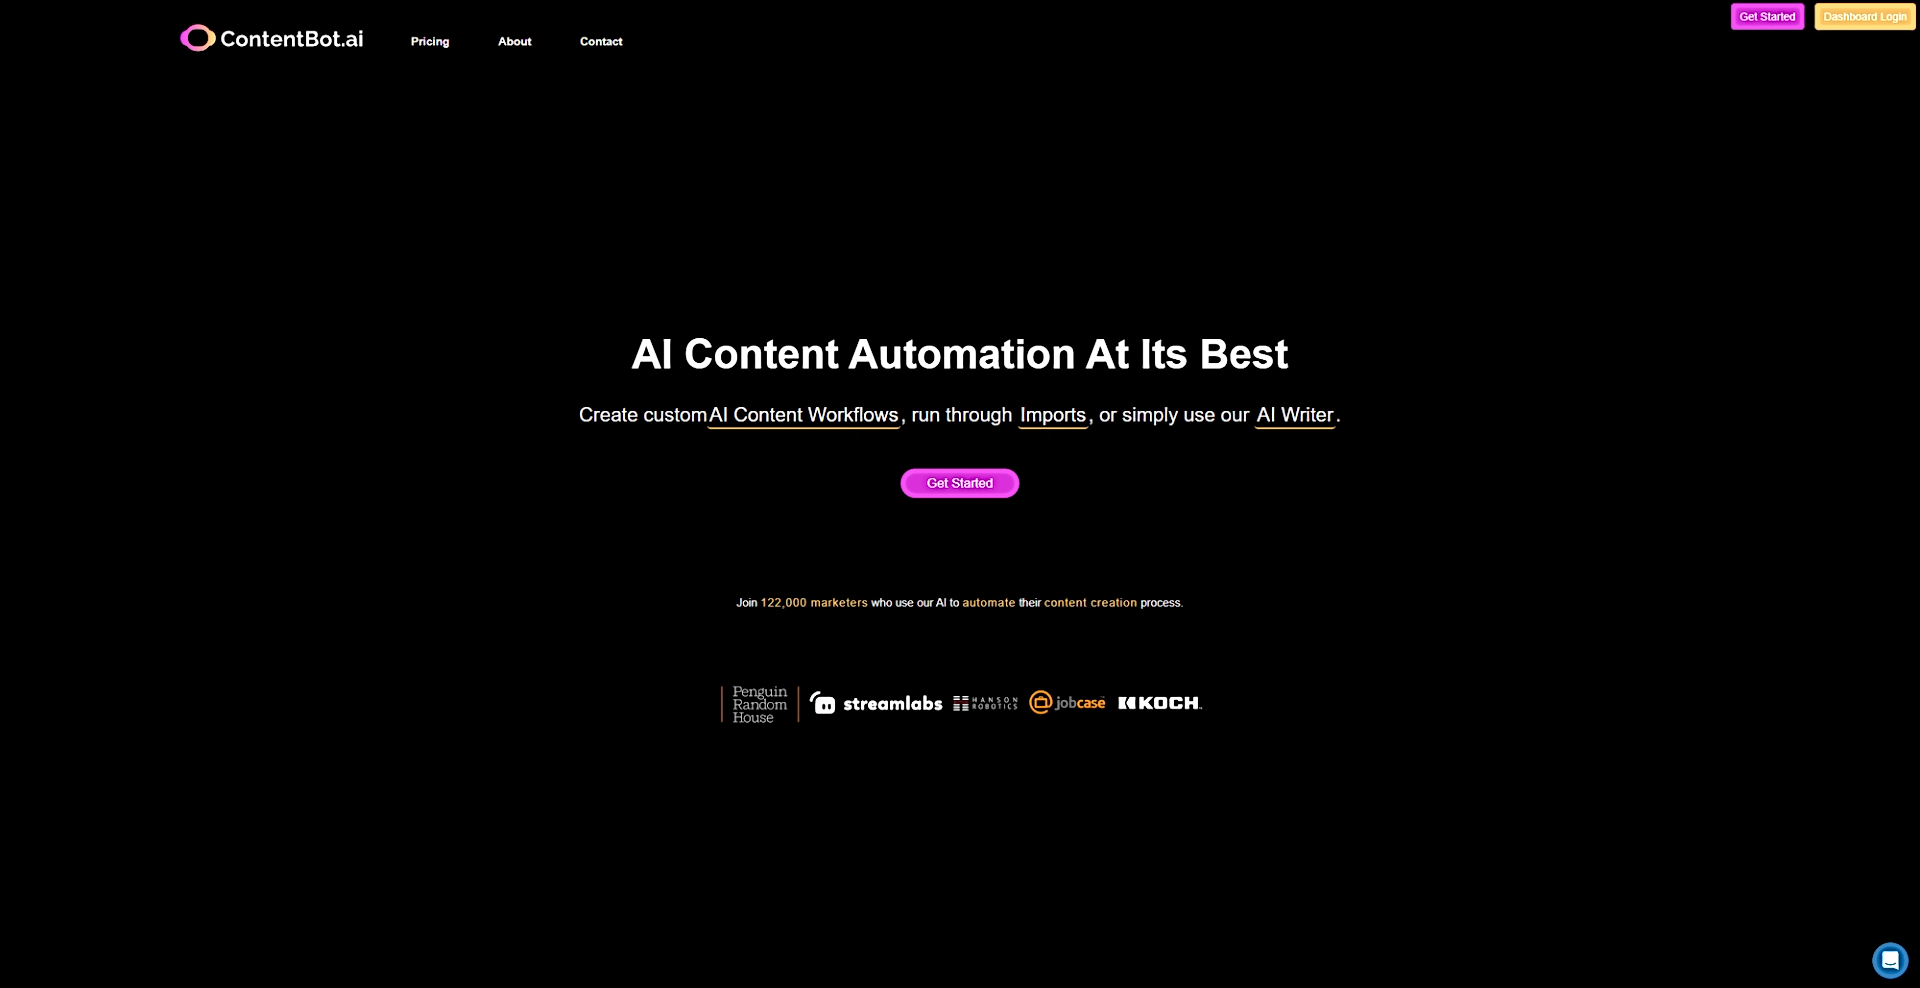 ContentBot featured